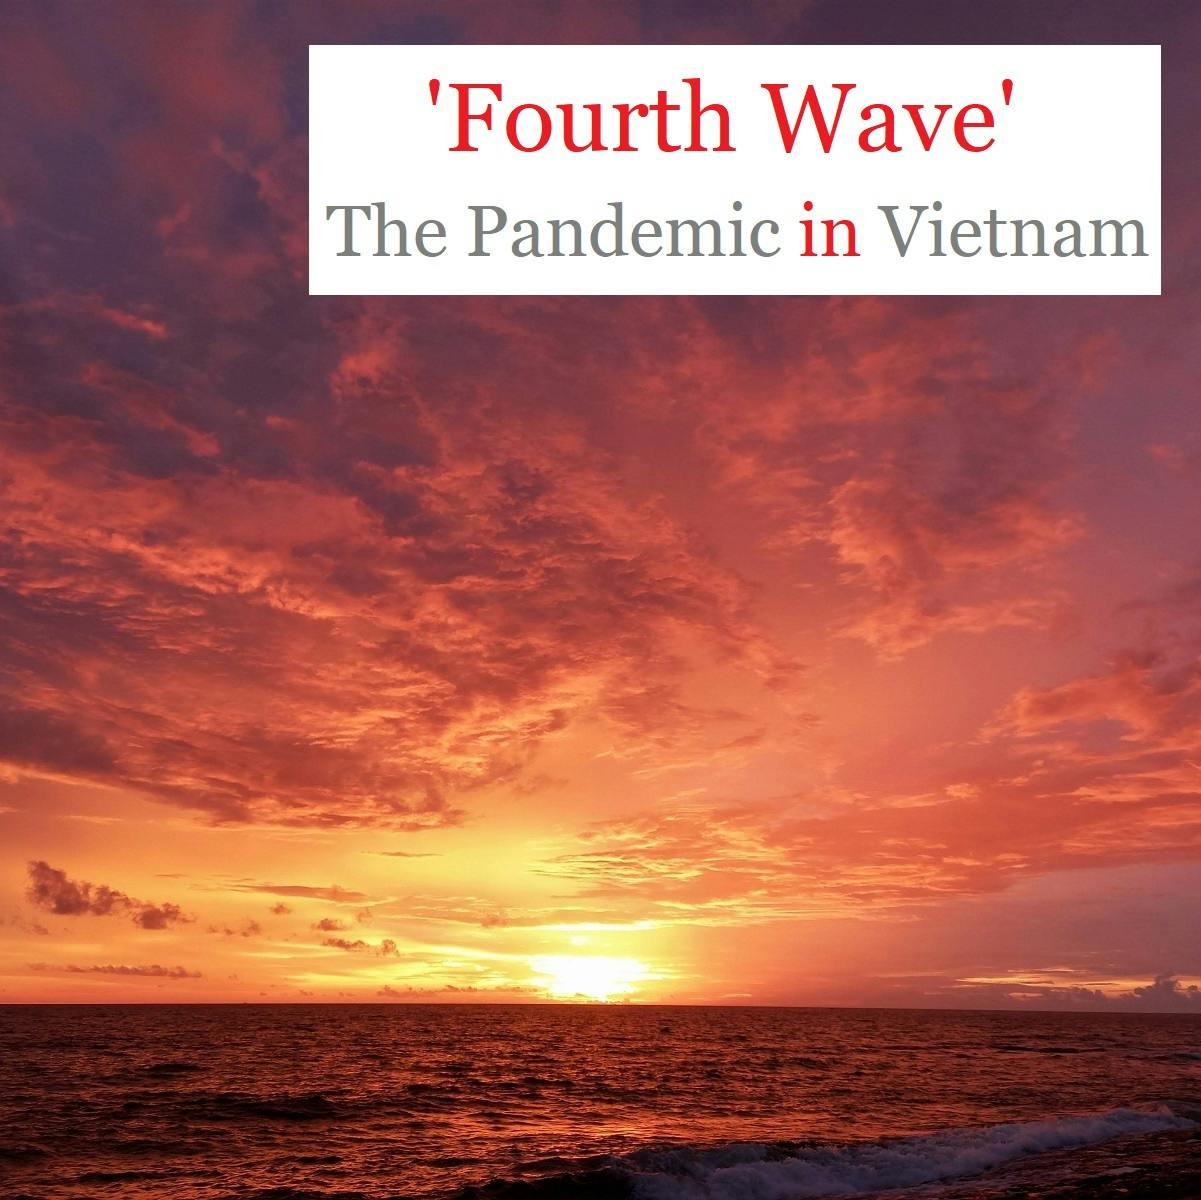 'Fourth Wave': The Covid-19 Pandemic in Vietnam